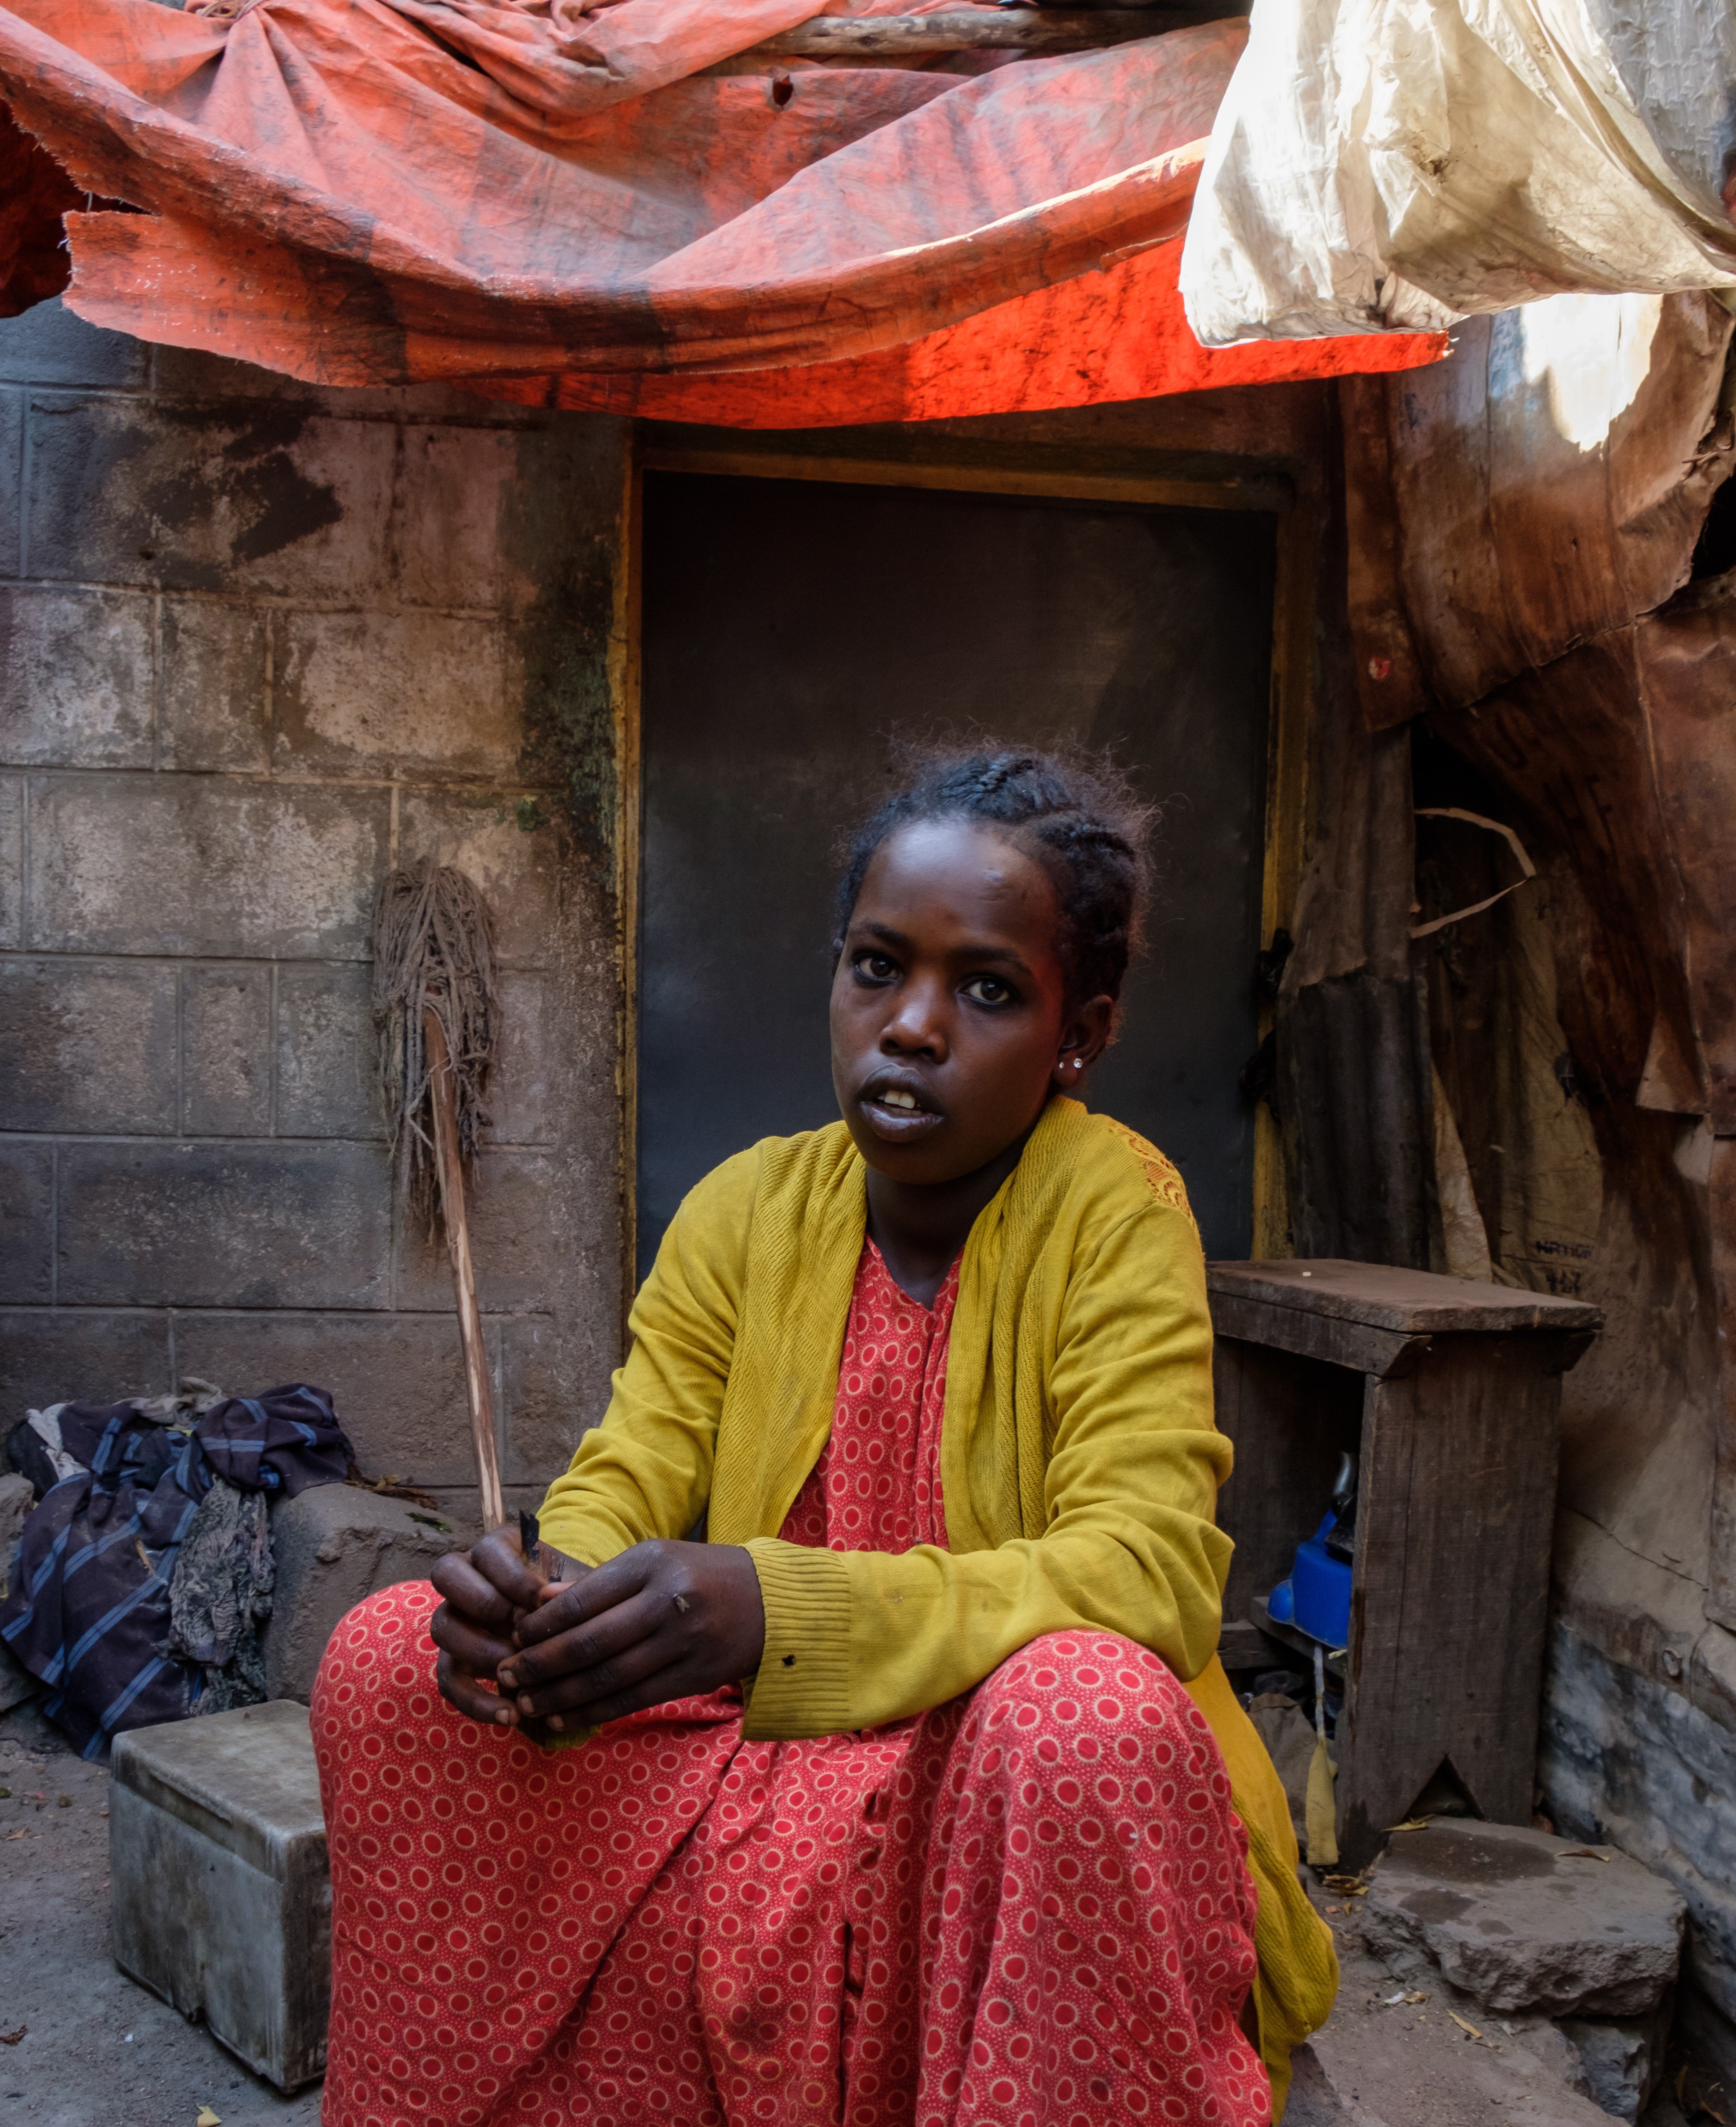 An adolescent girl in Ethiopia